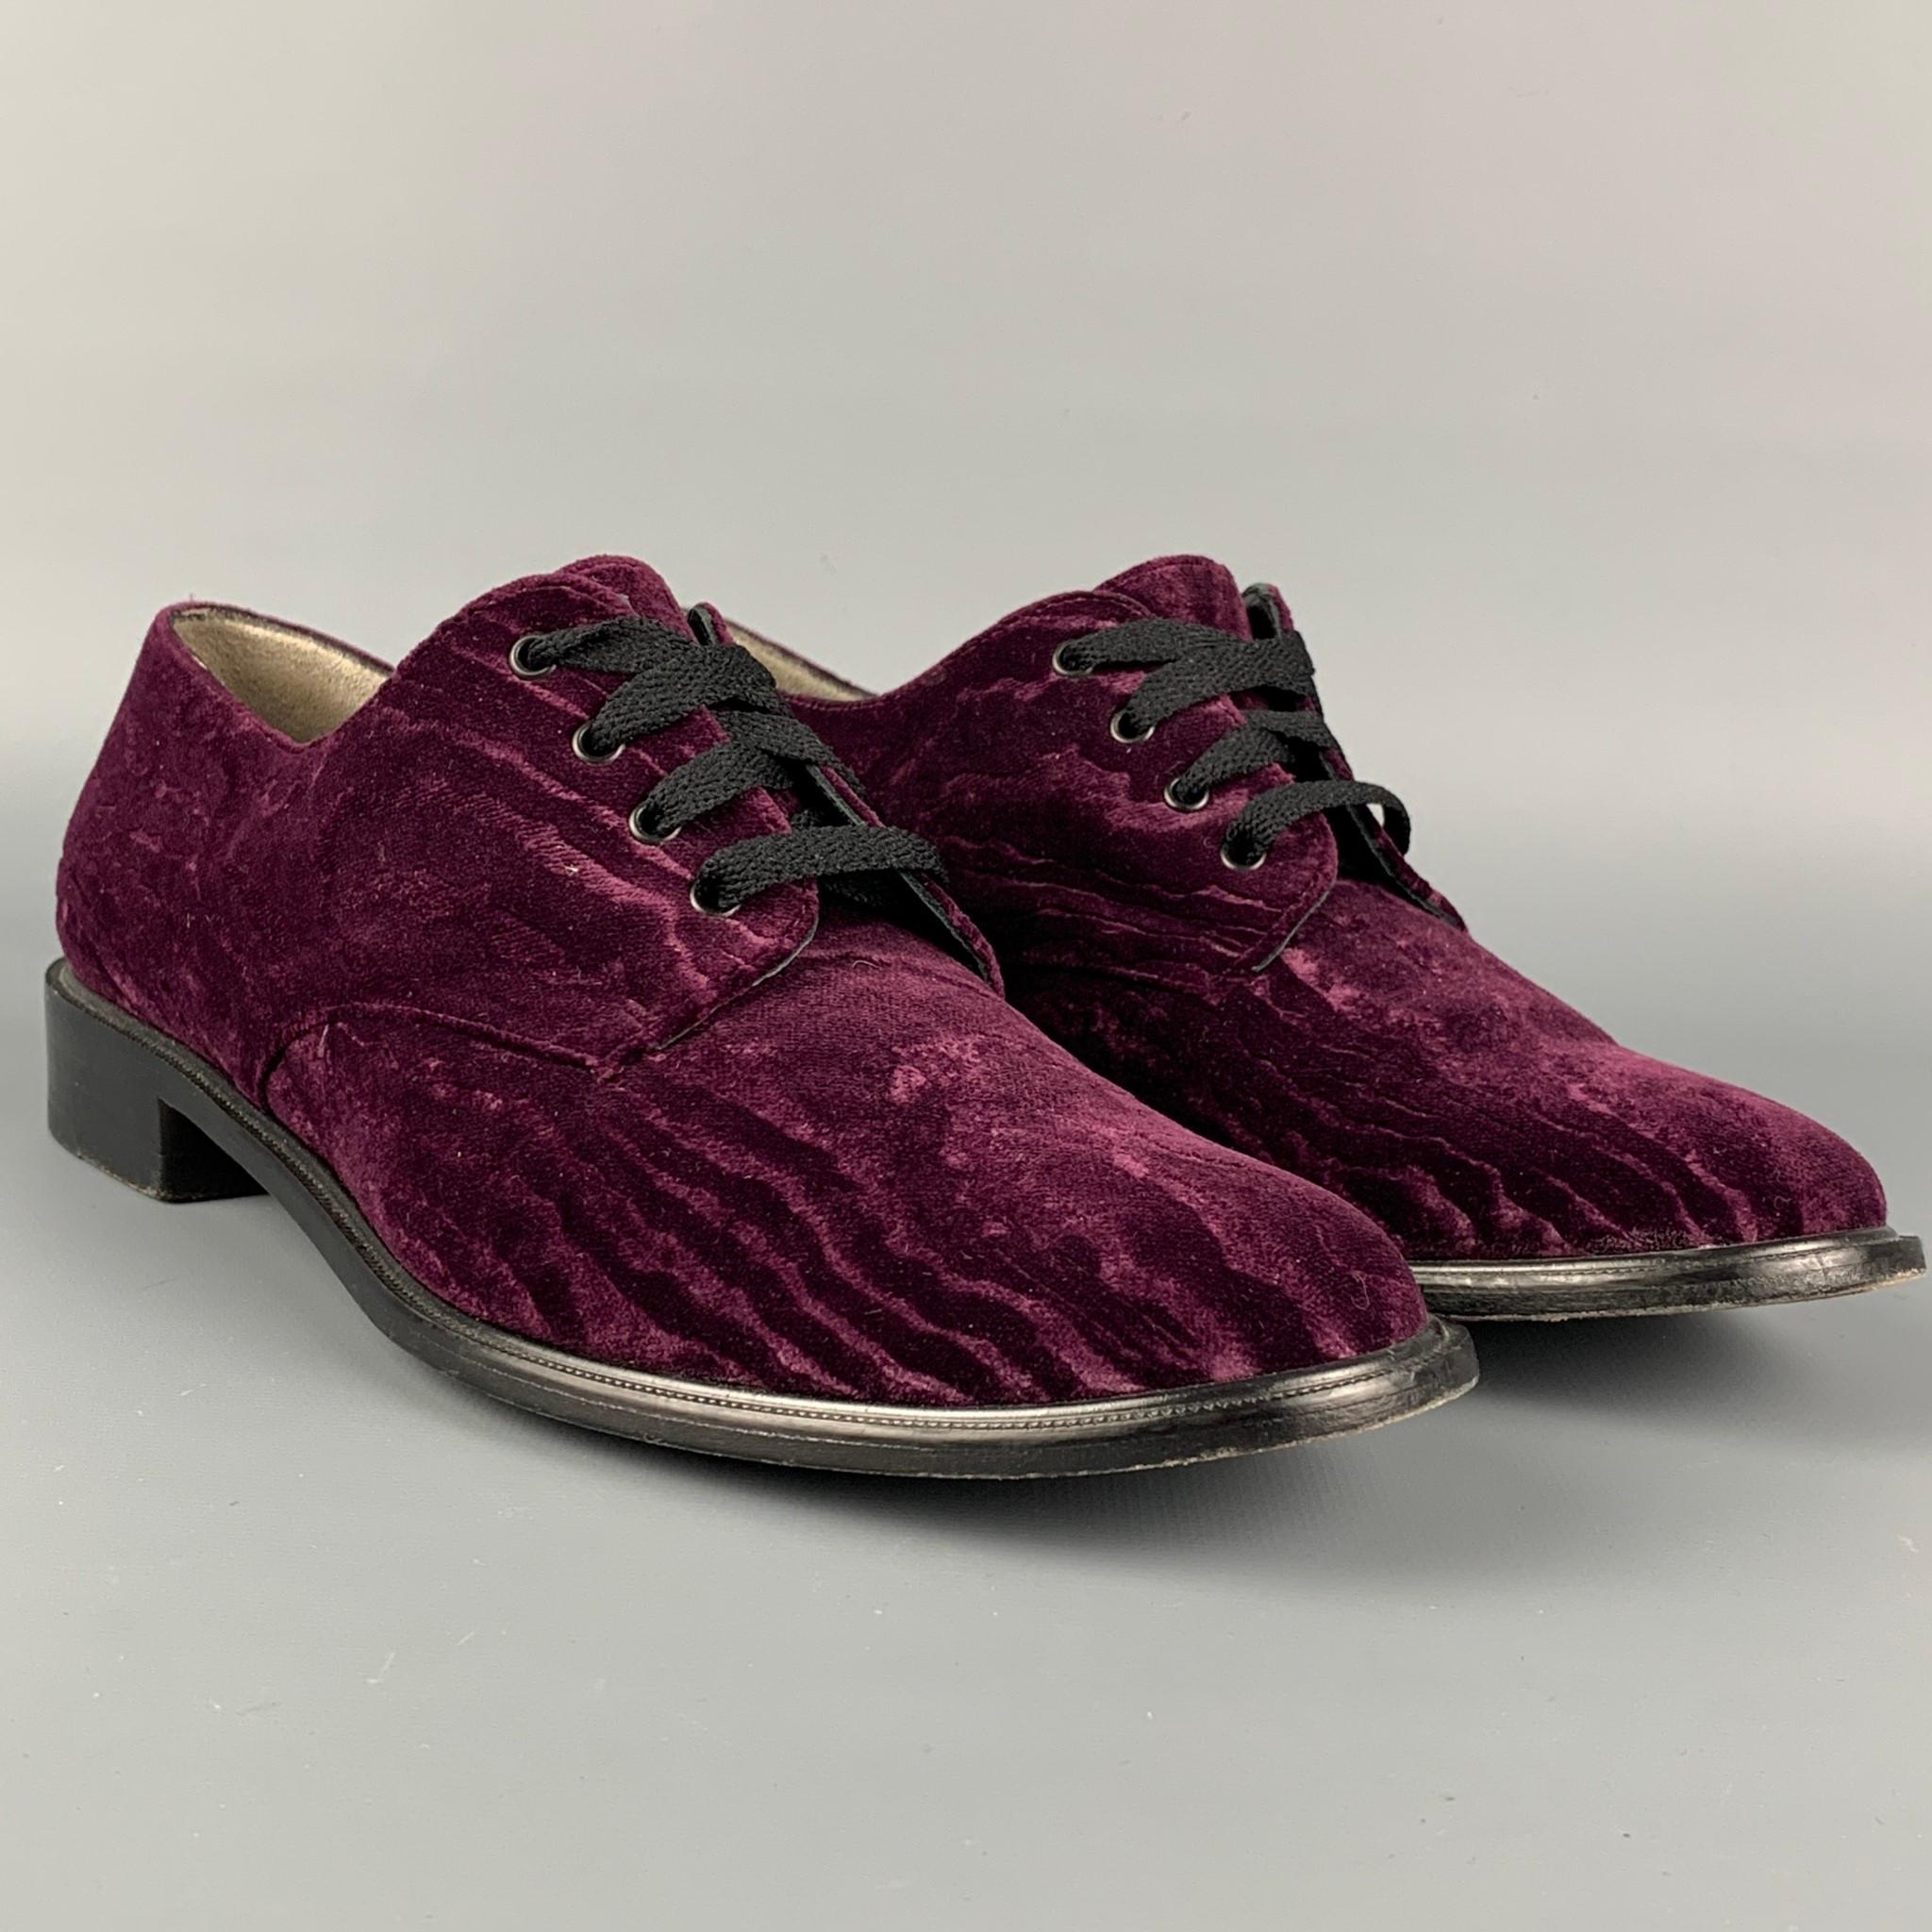 ROBERT CLERGERIE shoes comes in a purple jacquard velvet featuring a classic style and a lace up closure. Made in France. 

Very Good Pre-Owned Condition.
Marked: 38.5

Outsole: 10.75 in. x 3.75 in. 